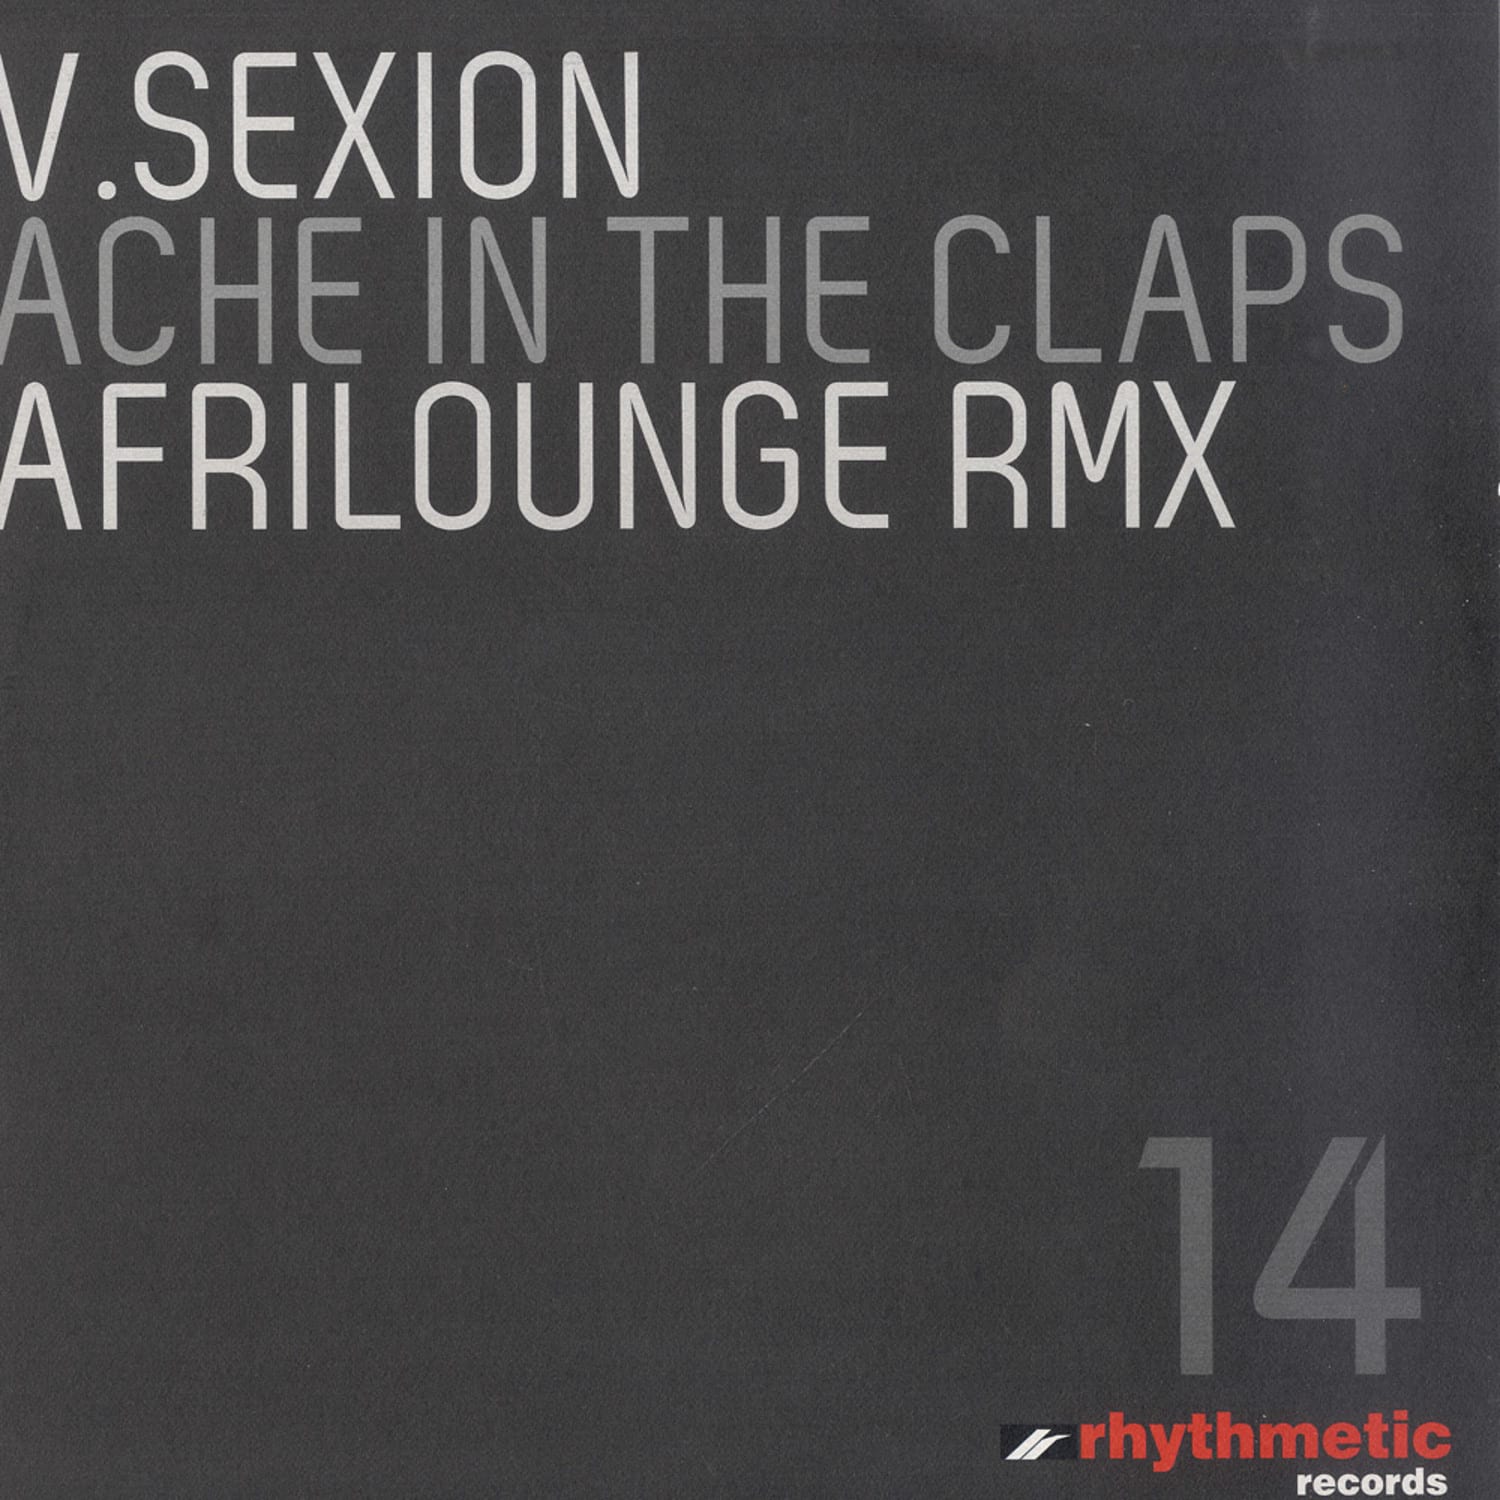 V. Sexion - ACHE IN THE CLUPS 